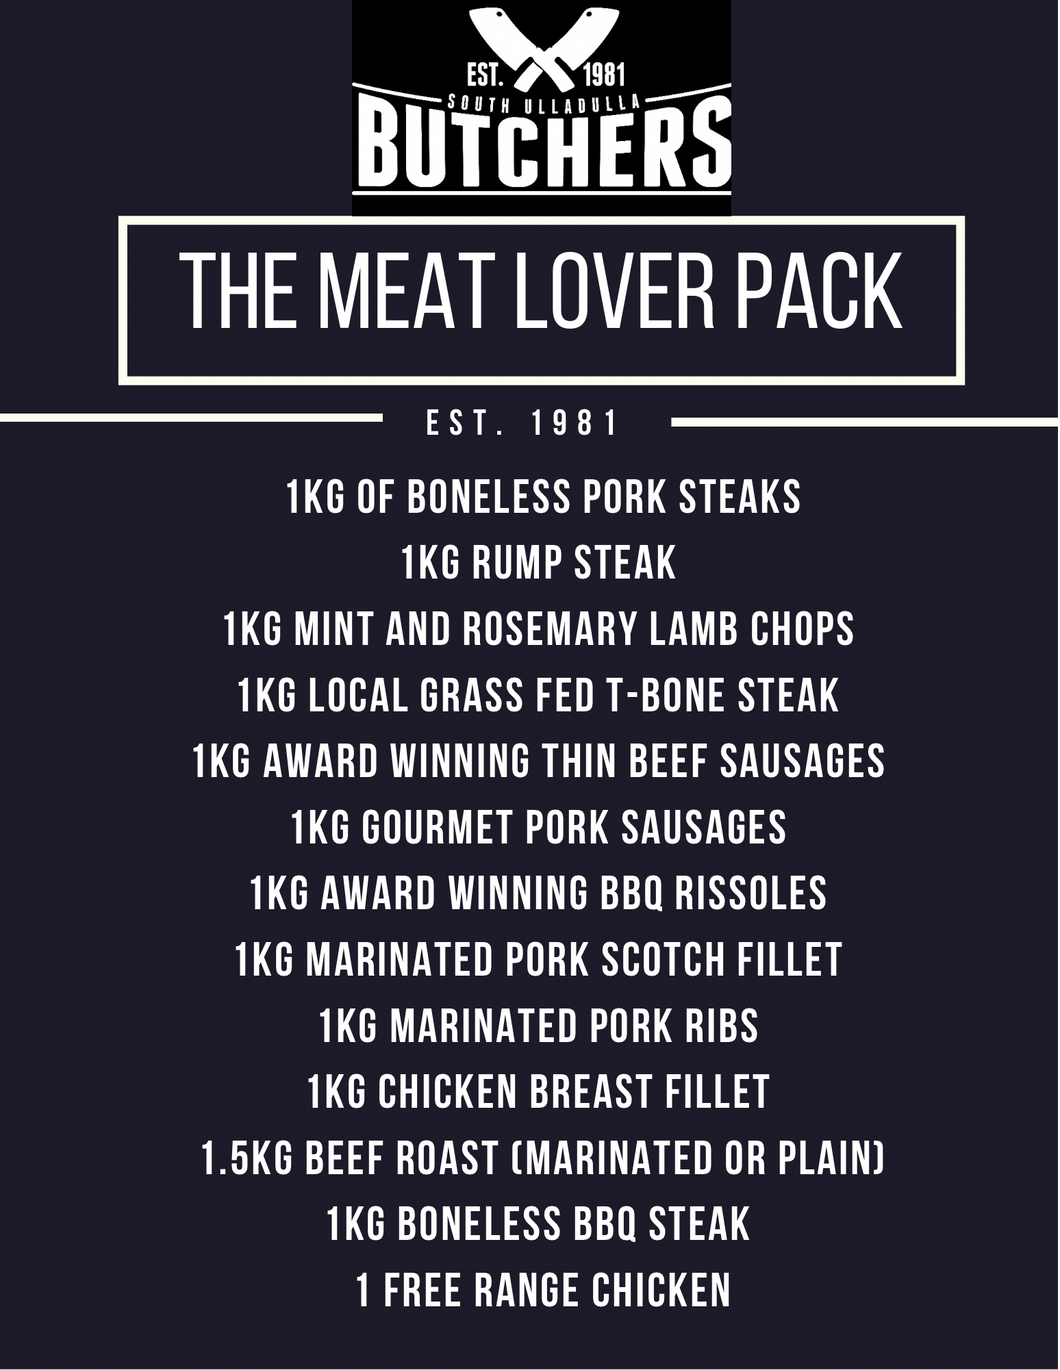 The Meat Lover Pack